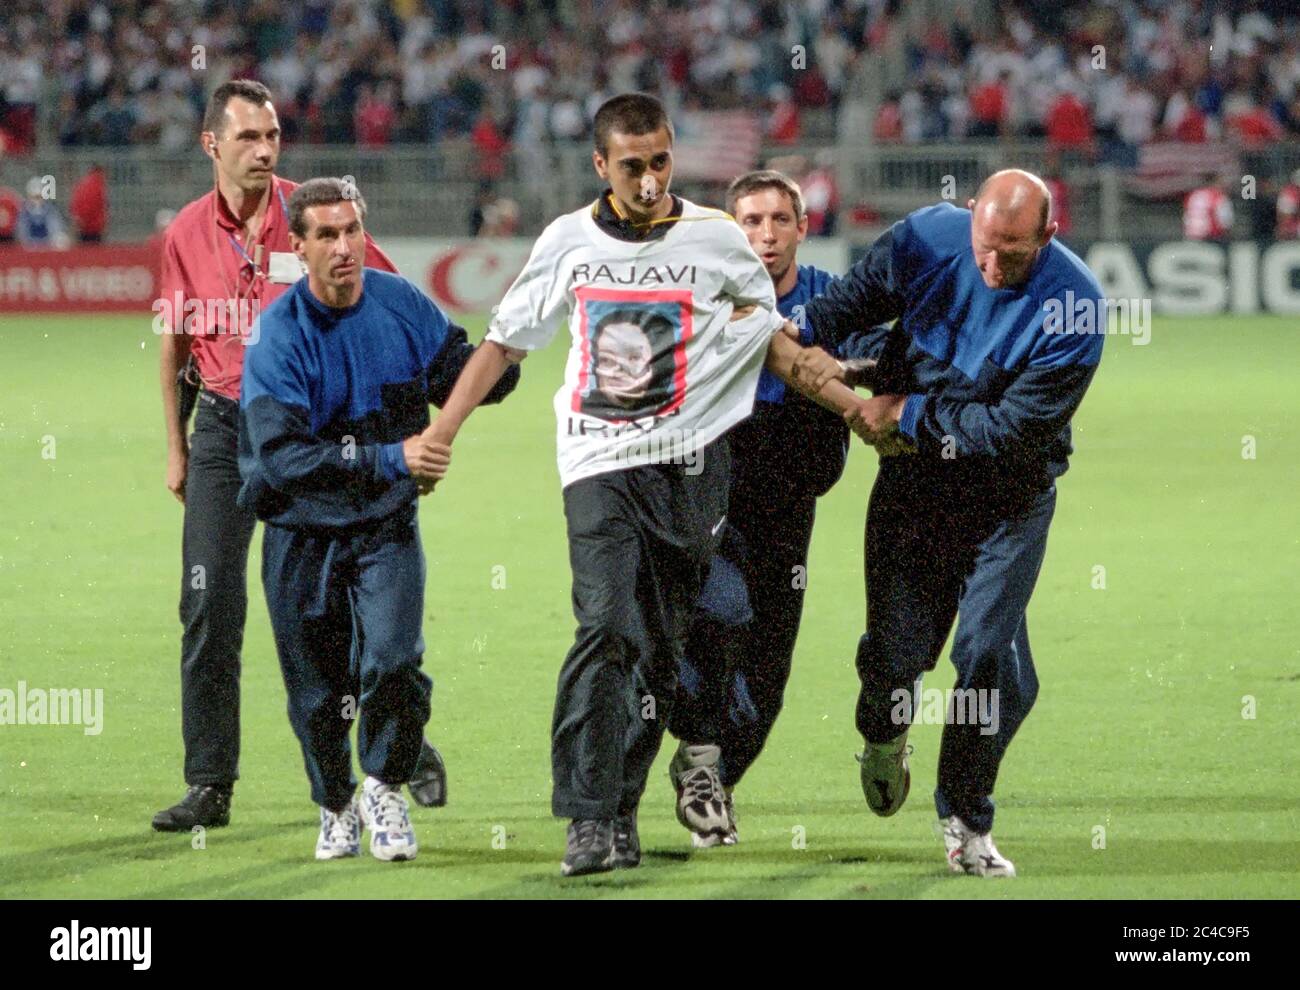 Pitch Invader Removed During Usa Vs Iran 1998 World Cup Match In Lyon On June 21 1998 Stock Photo Alamy